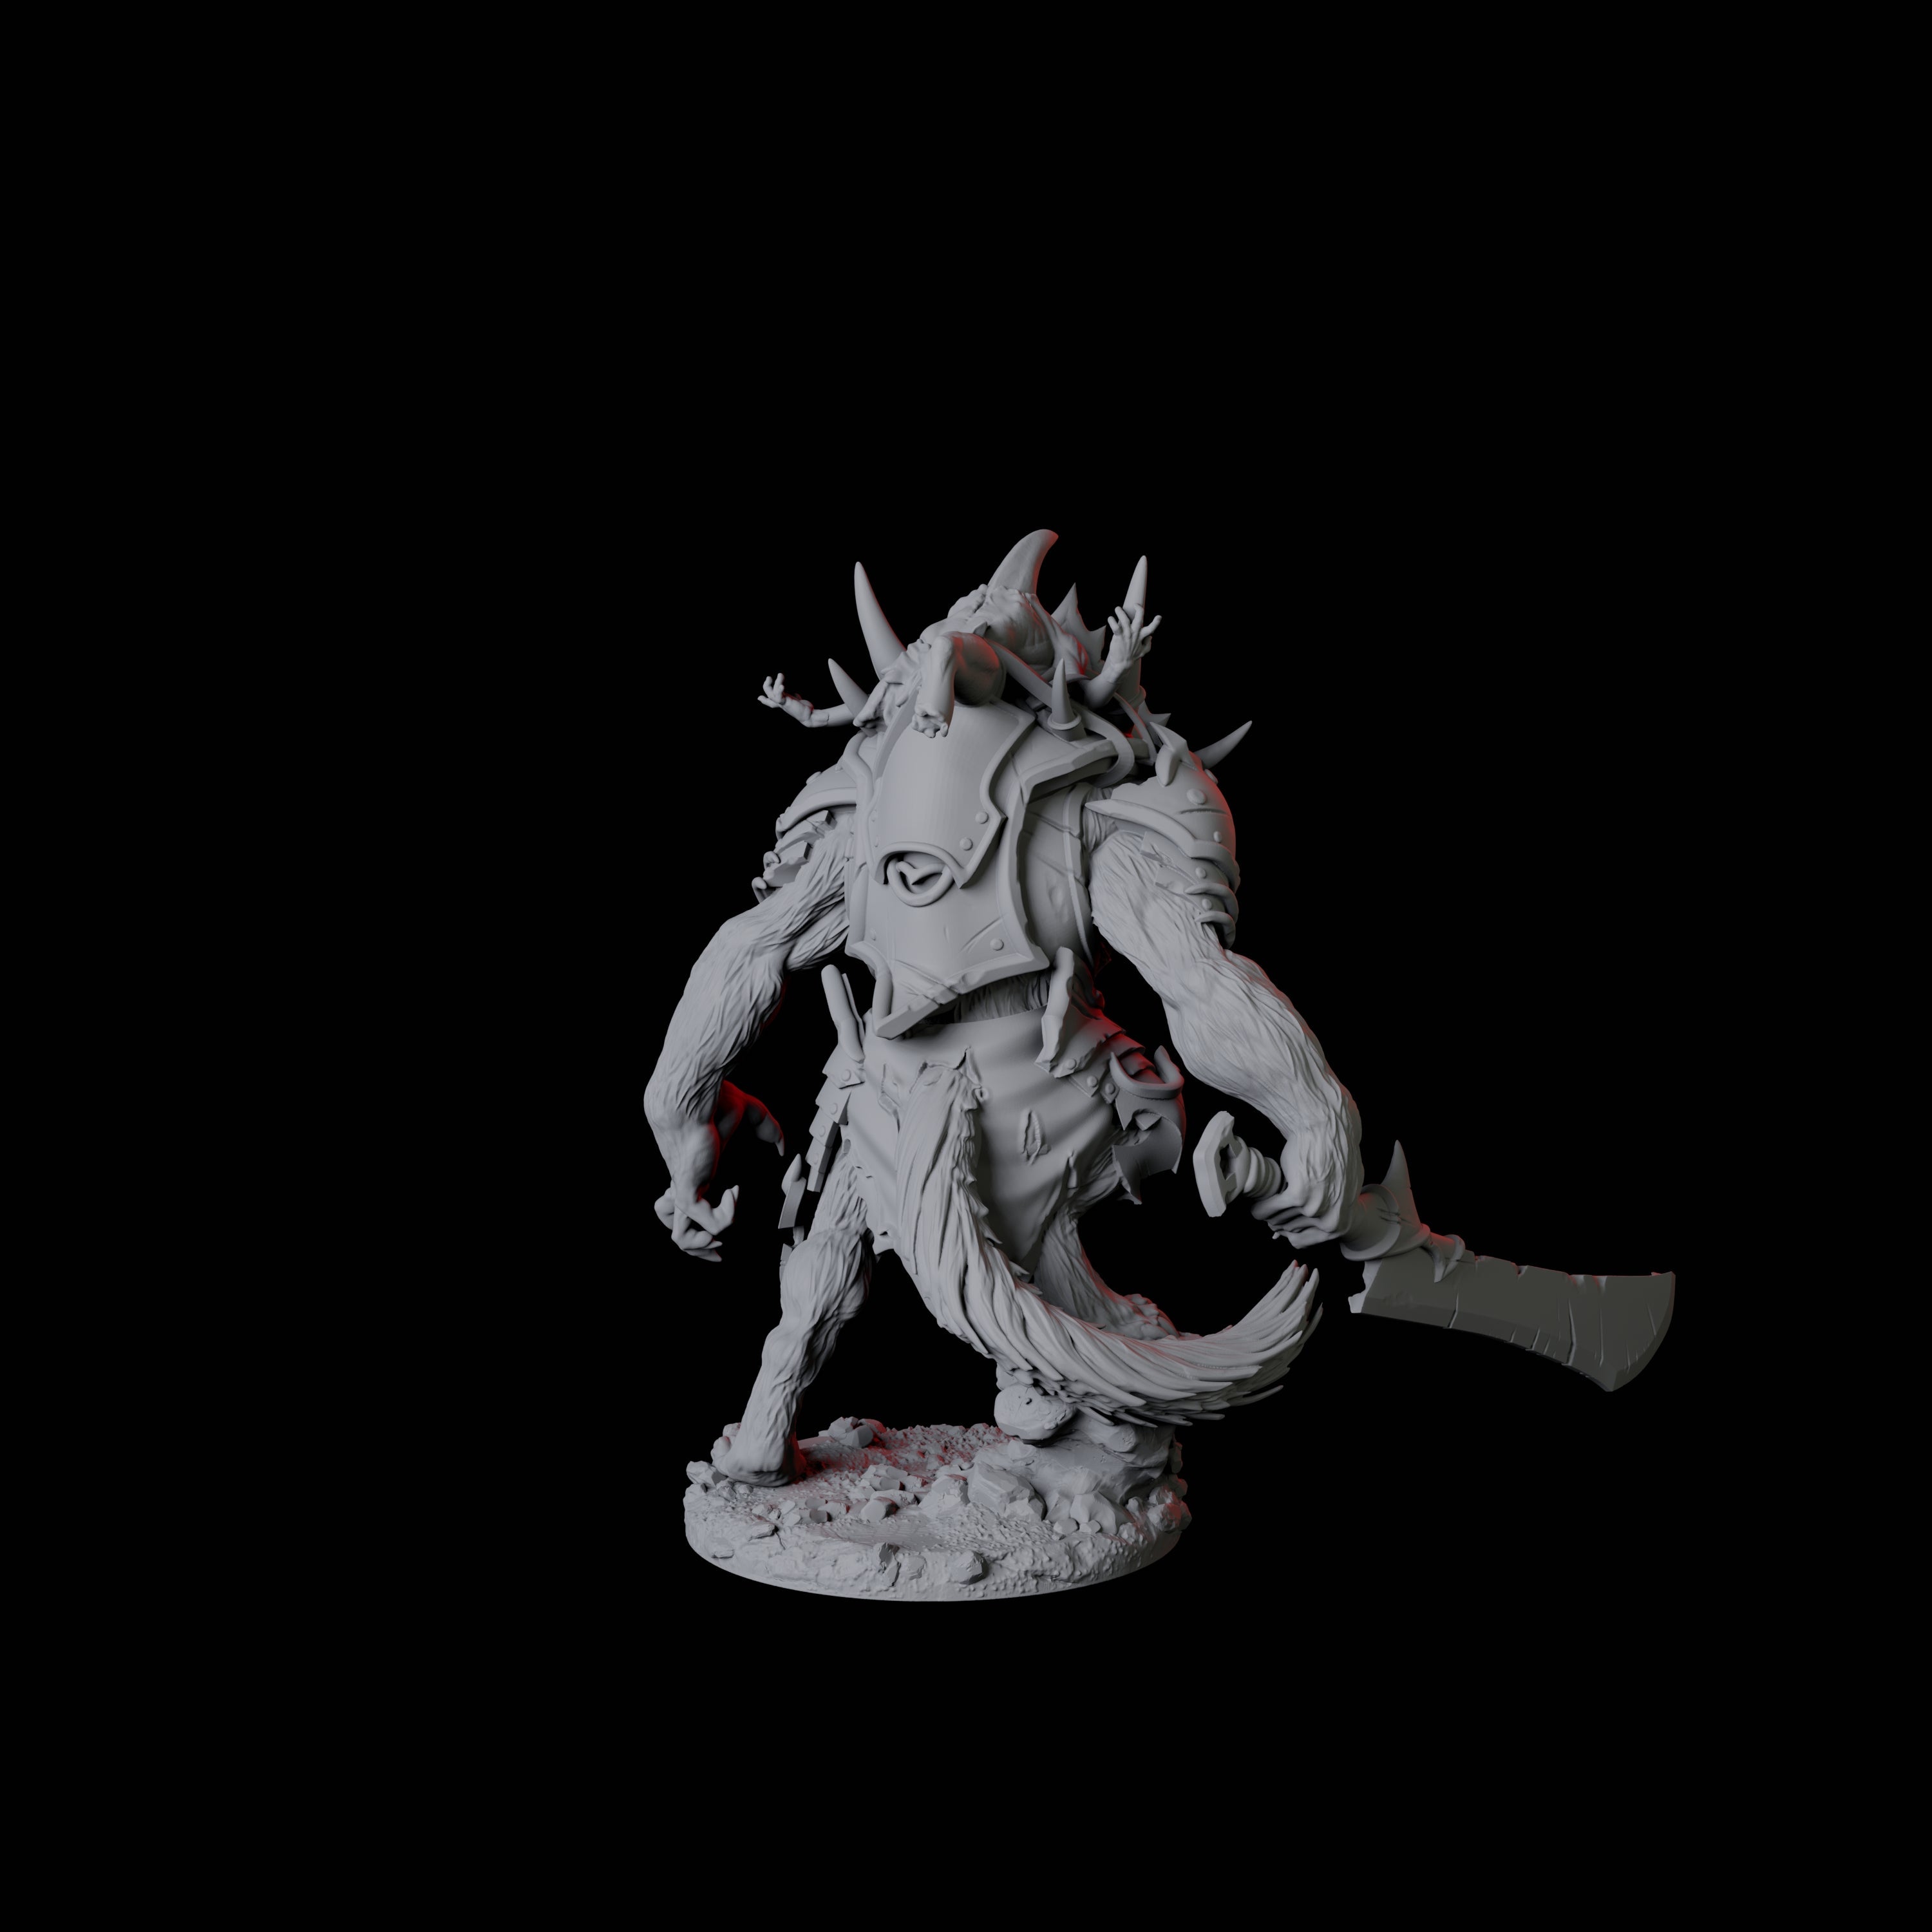 Gnoll Claw Fighter B Miniature for Dungeons and Dragons, Pathfinder or other TTRPGs